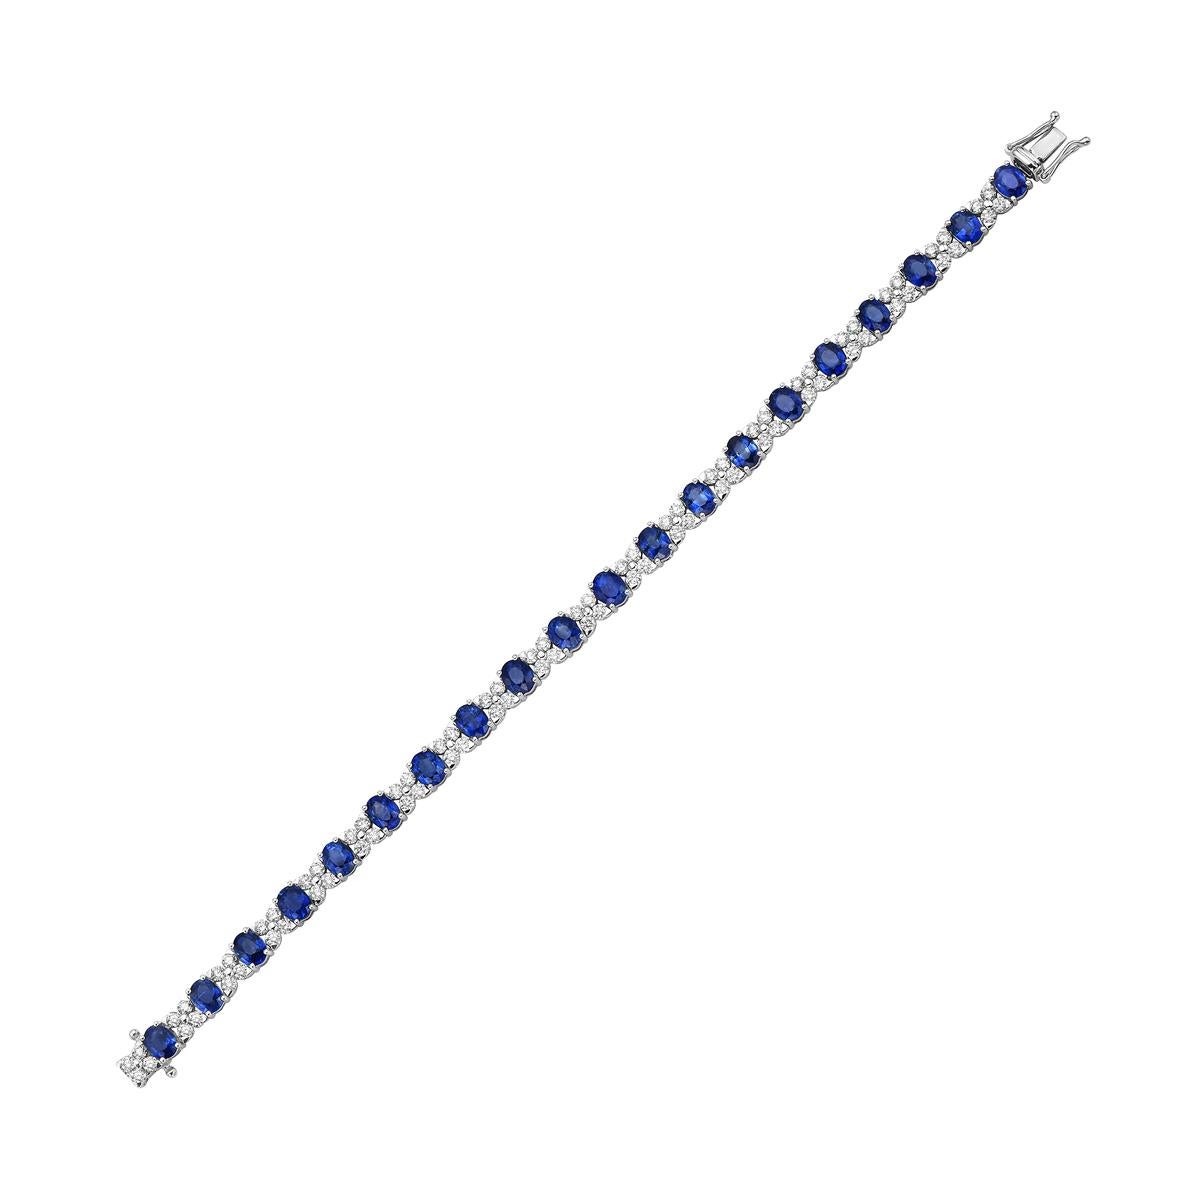 With this exquisite sapphire and diamond bracelet, style and glamour are in the spotlight. This 18-karat sapphire and diamond bracelet is made from 12.0 grams of gold. This bracelet is adorned with VS2, G color diamonds, made out of 80 diamonds